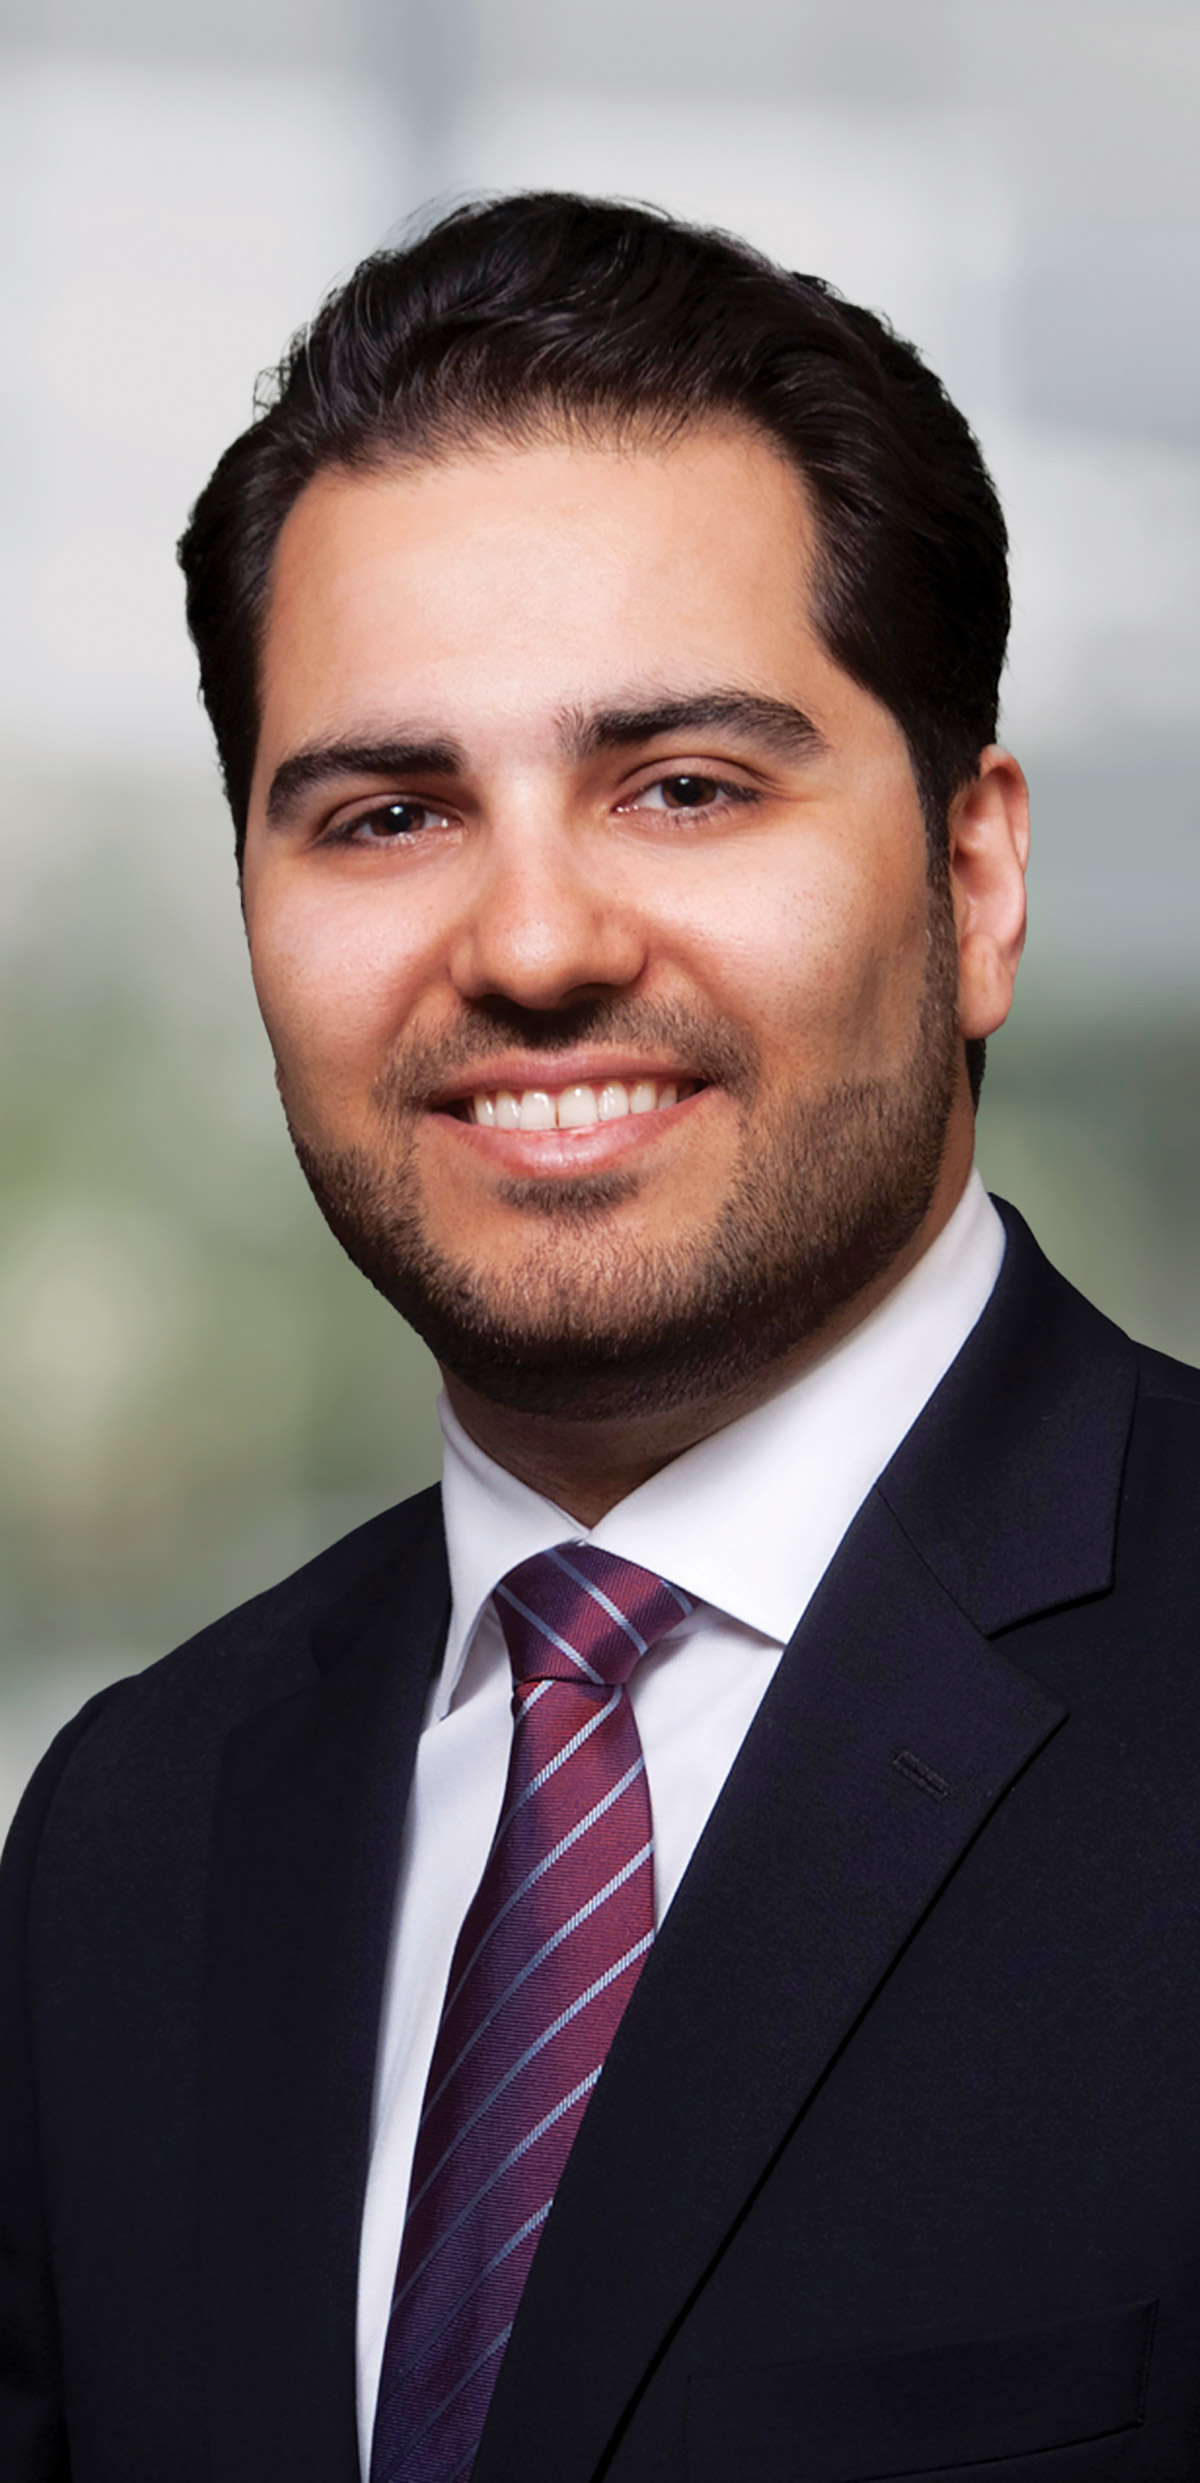 A portrait headshot photograph of Mehdi Ansari smiling in a dark black suit and white button-up dress shirt underneath with a multi-colored tie (burgundy as the primary base color and gray lined stripes downward pattern as the secondary color)